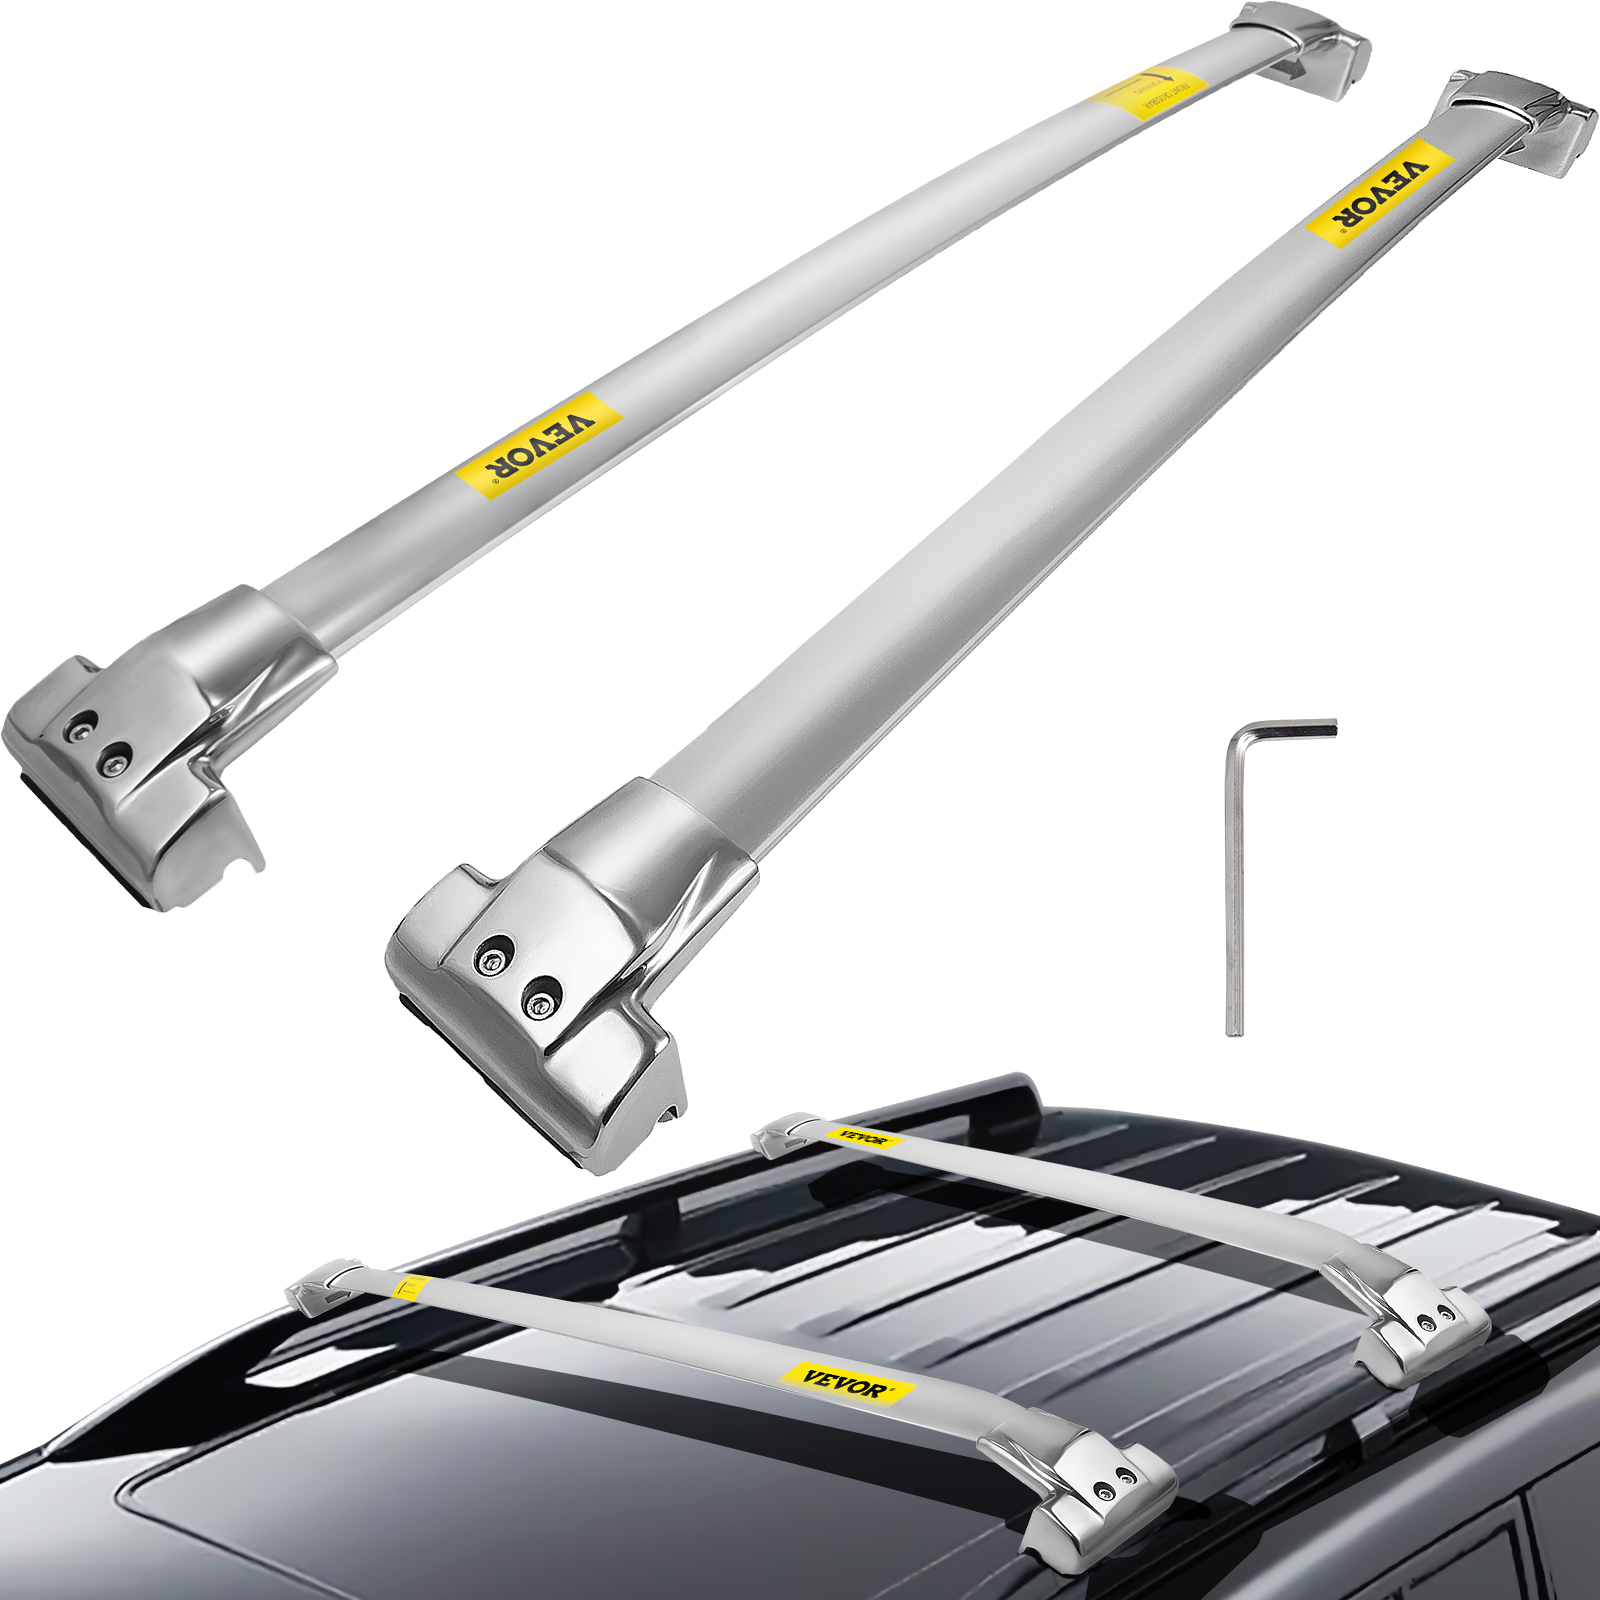 Roof Rack Rail Cross Bar fit for JEEP Grand Cherokee 2011-2020 Silver Set Carrier Baggage Top Luggage Pair Durable Storage Cross Bar Roof Rails&nbspStainless steel от Vevor Many GEOs